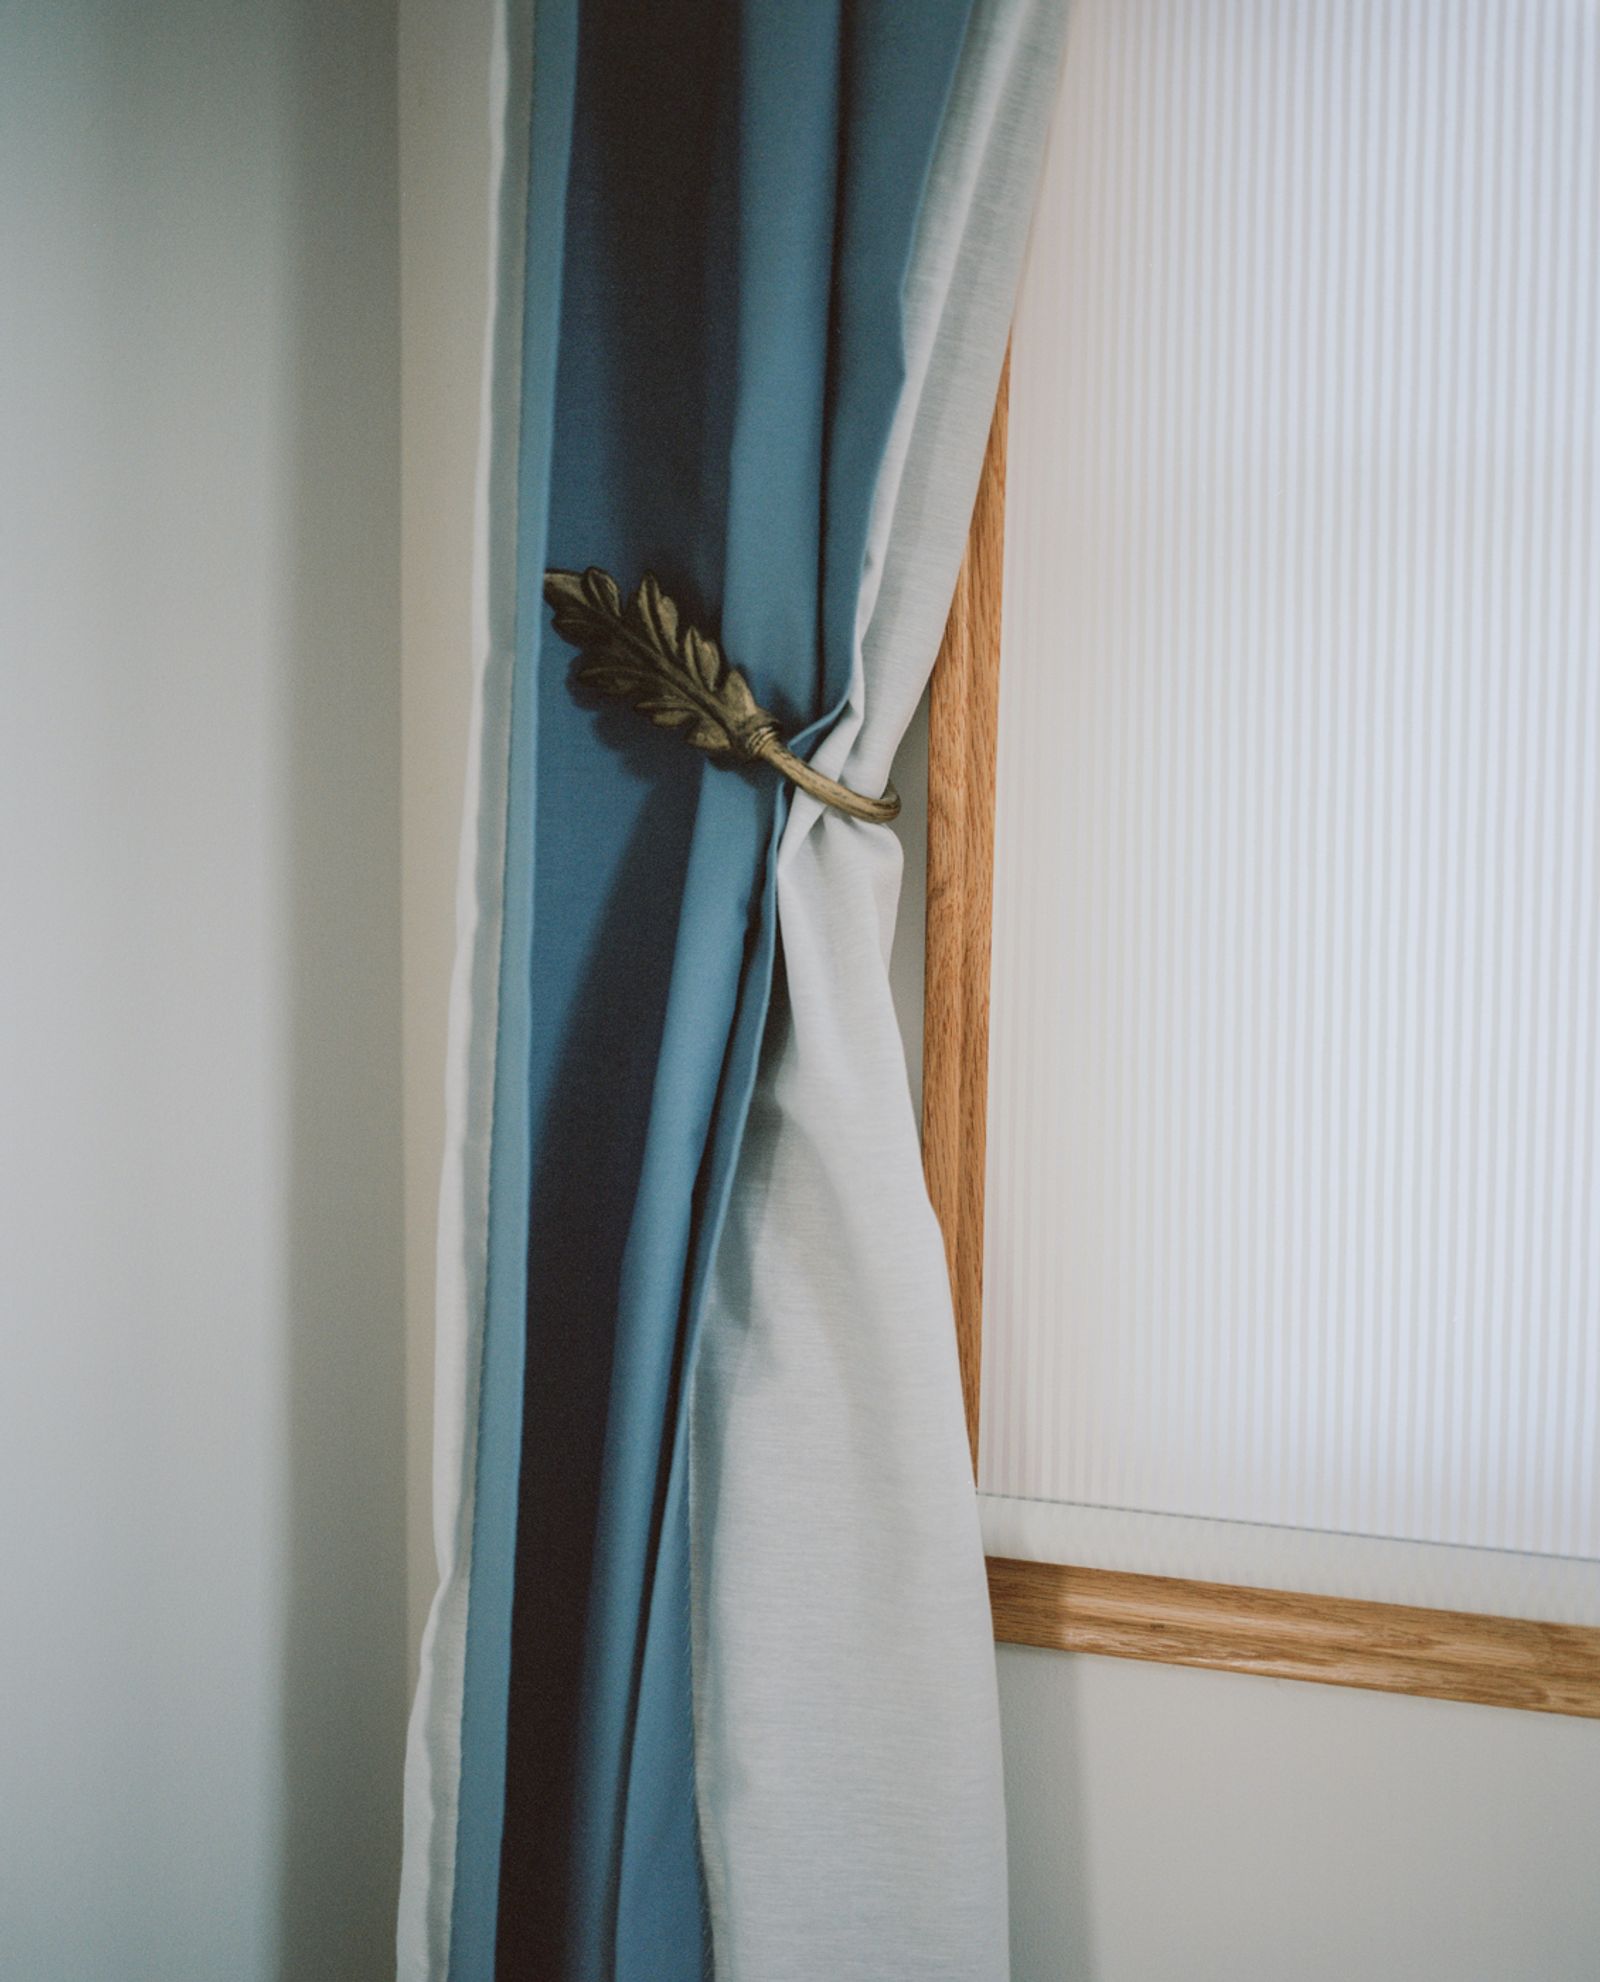 © Katrina Sorrentino - Image from the On The Nature of Being Held photography project